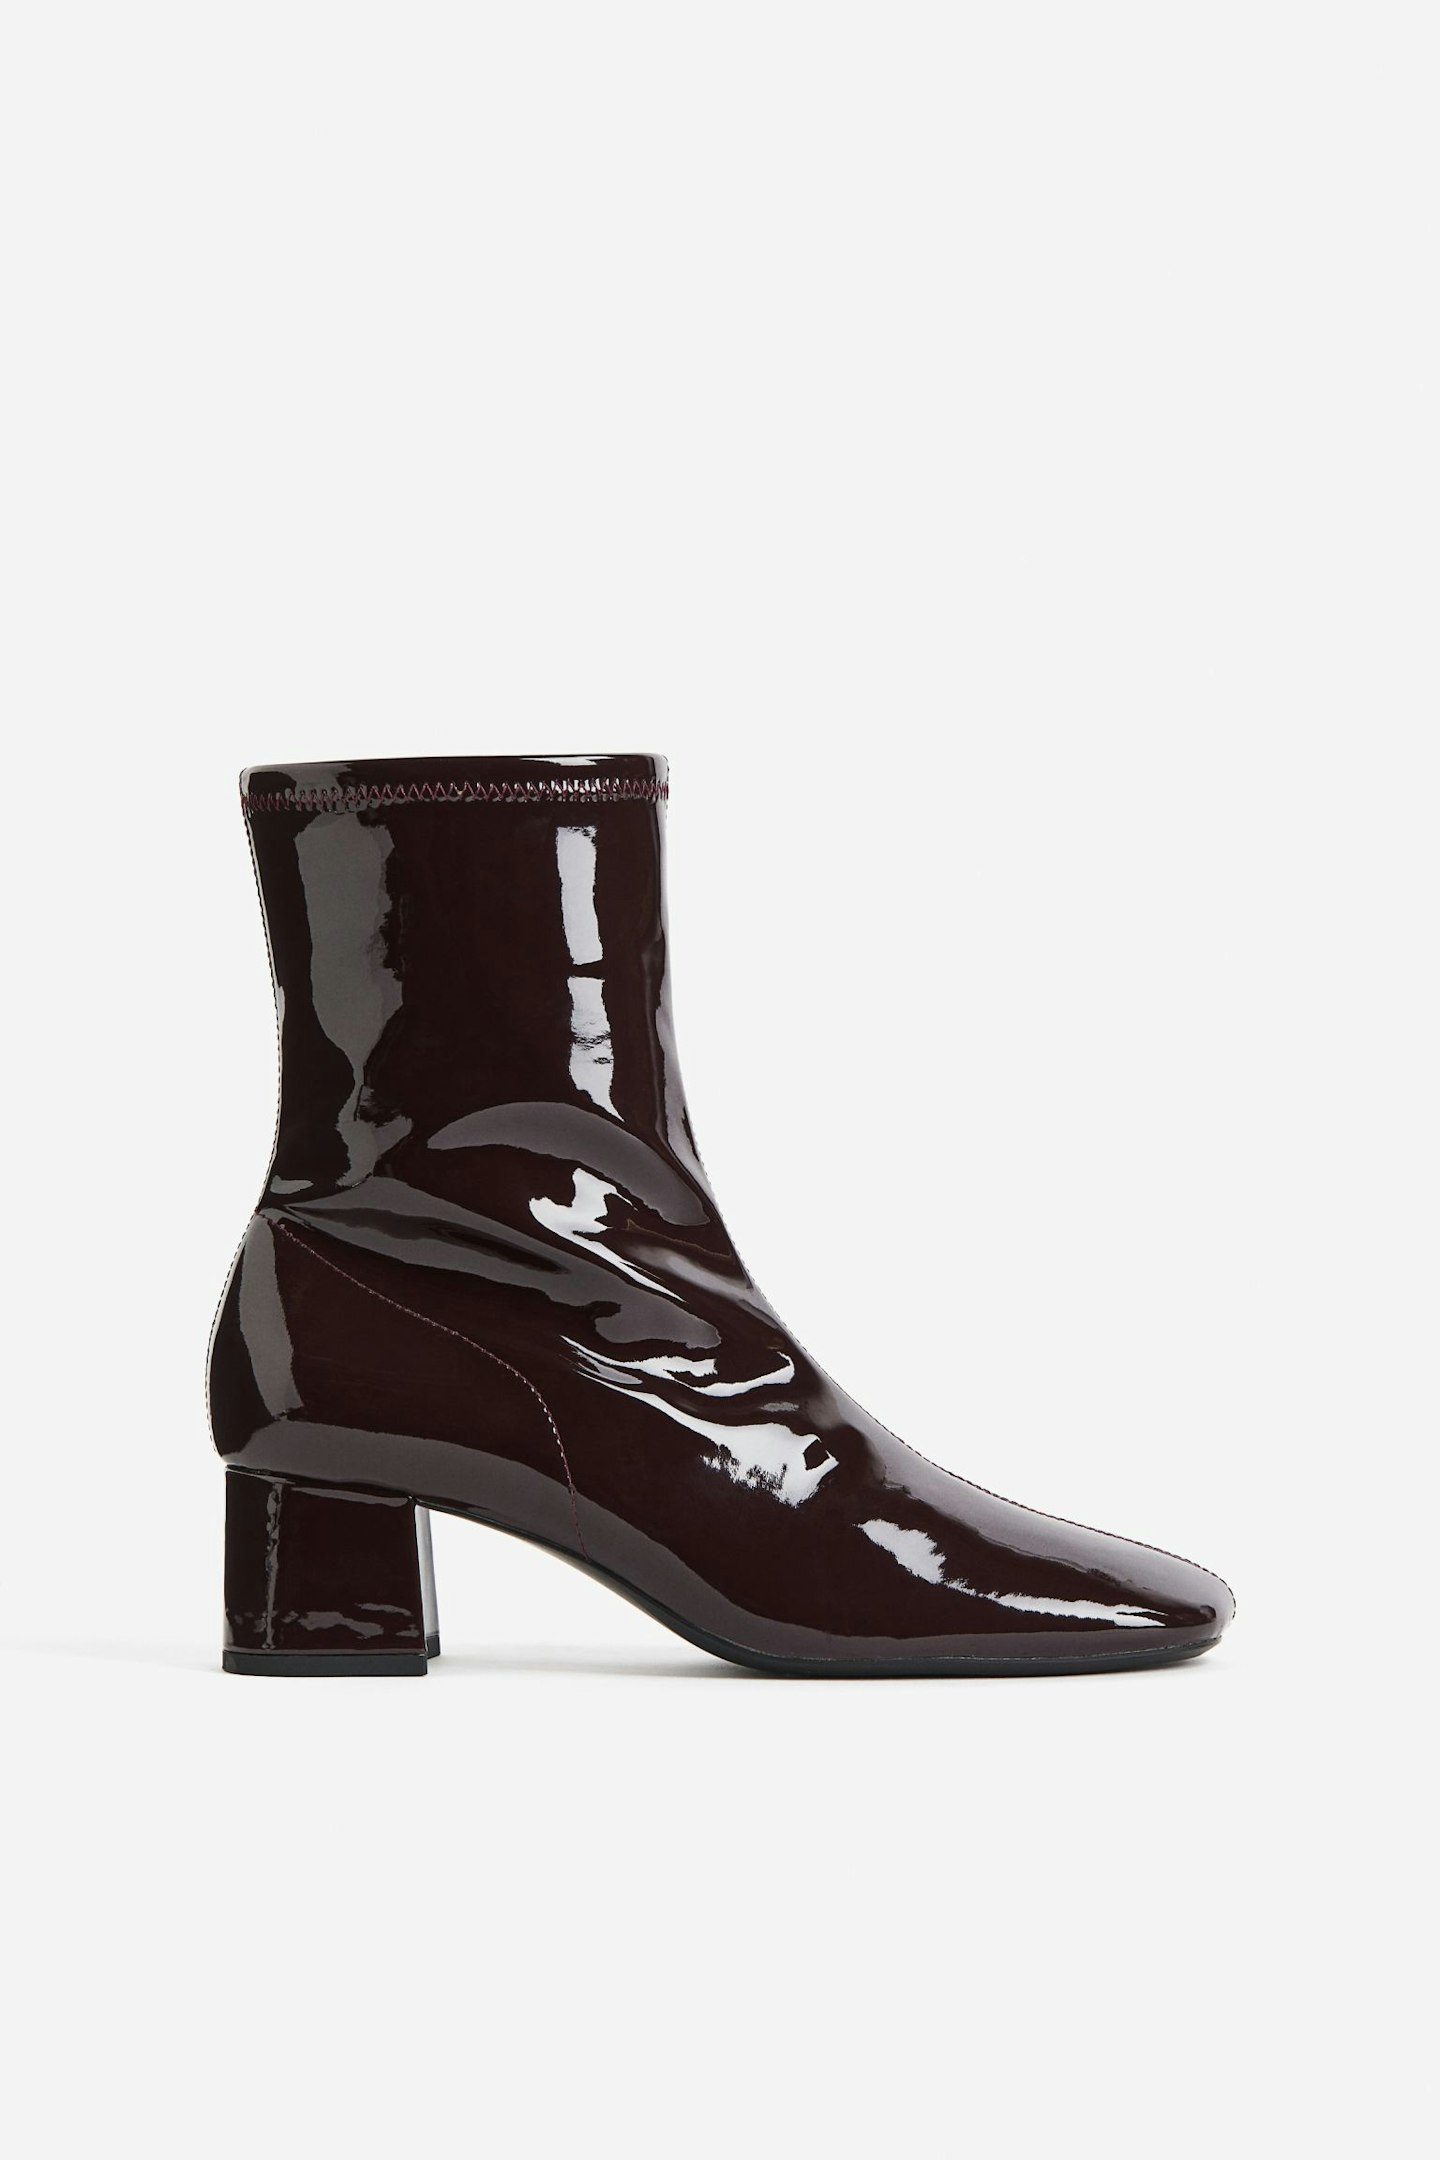 H&M Patent Ankle Boot